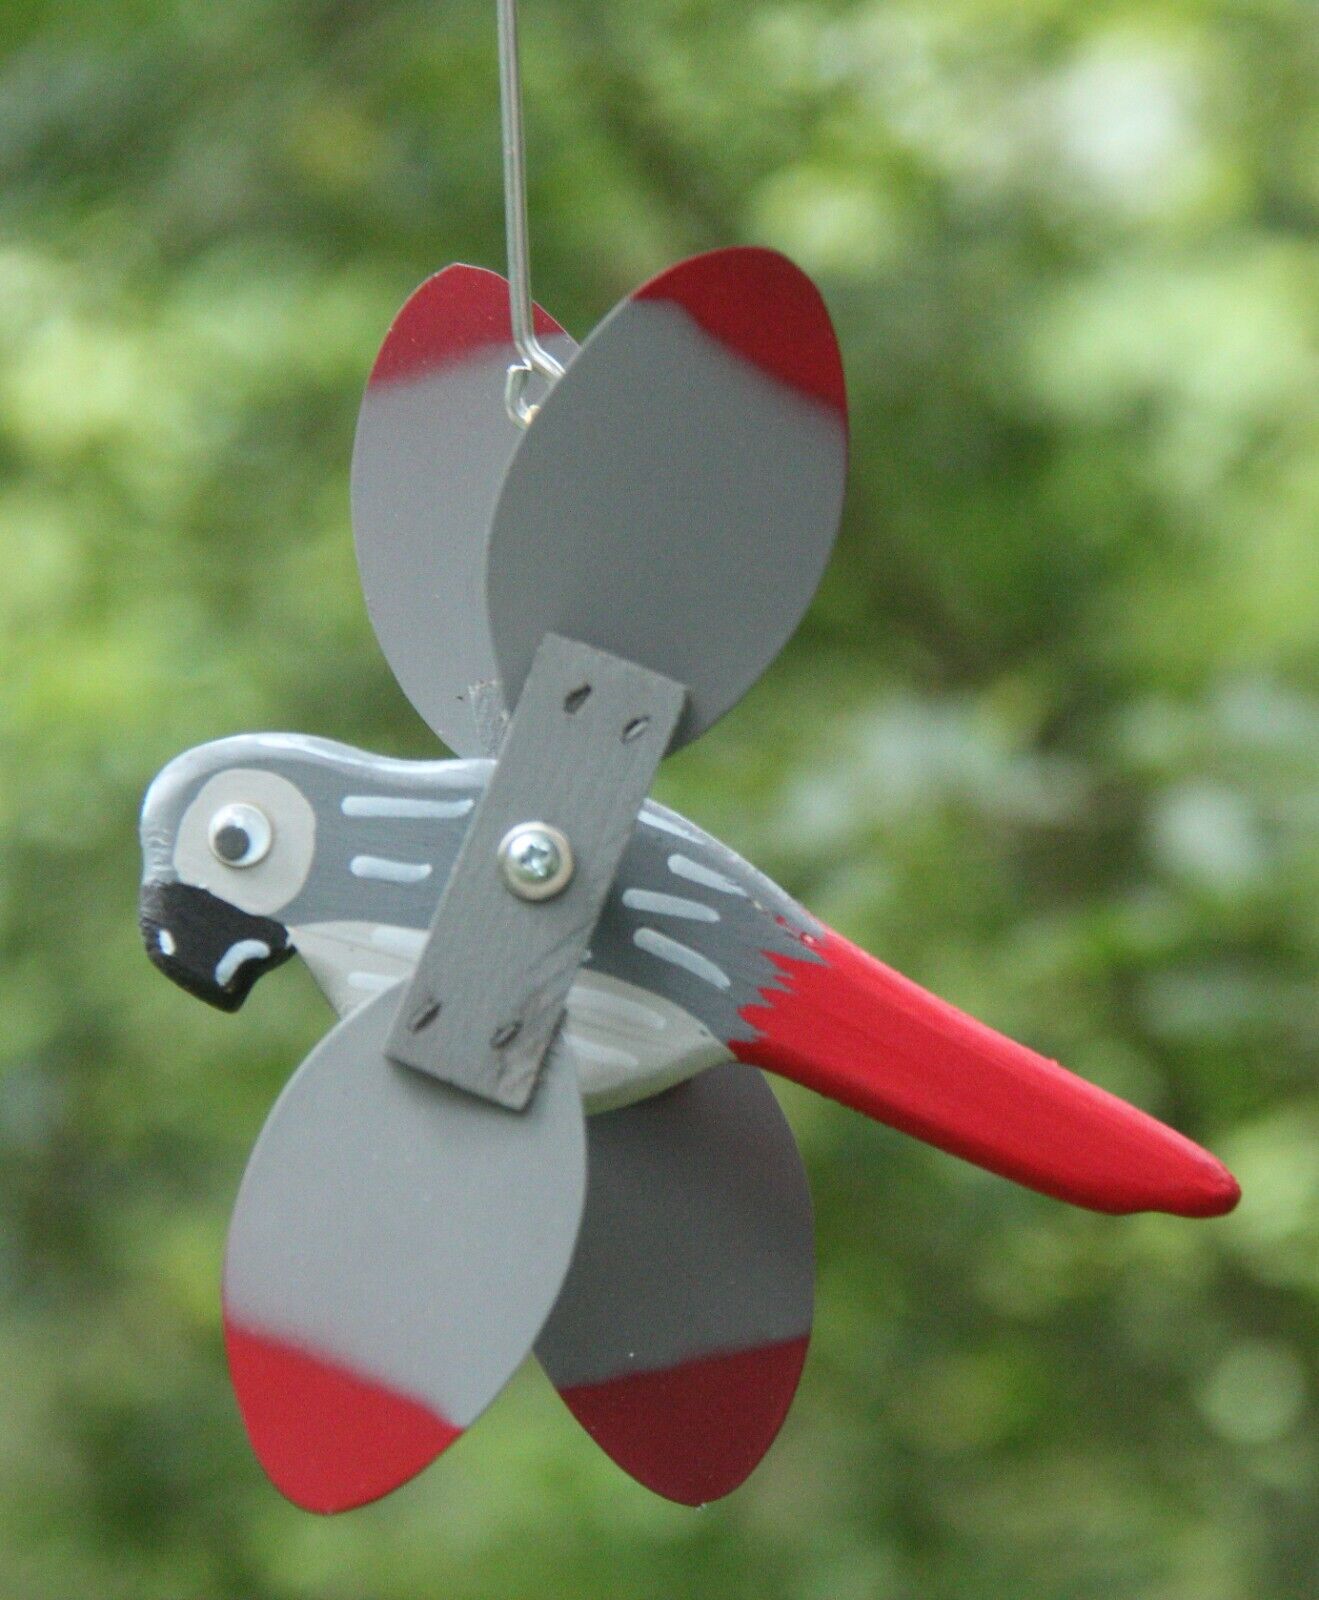 African Grey Parrot Mini Whirligigs Whirligig Yard Art Hand made from wood